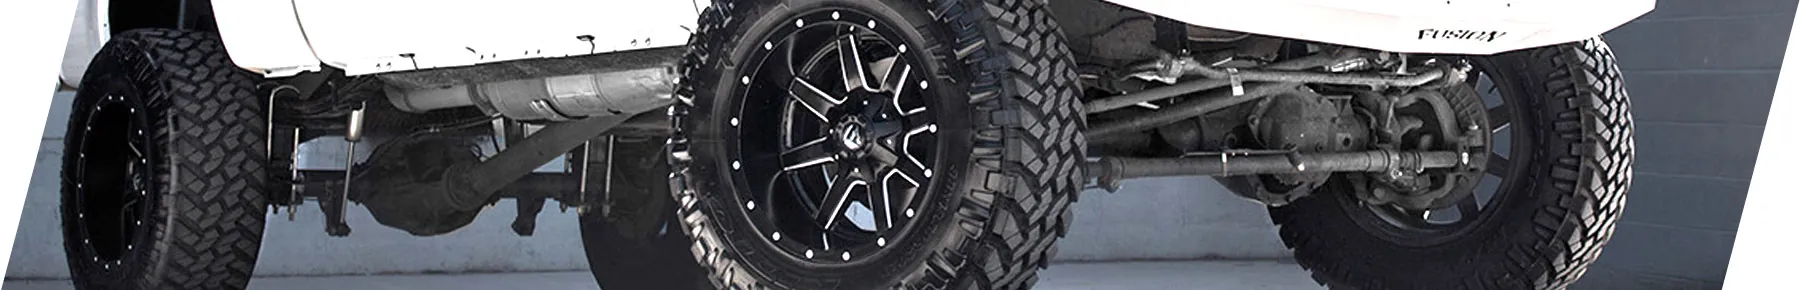 1999-2022 Super Duty Wheels and Tires